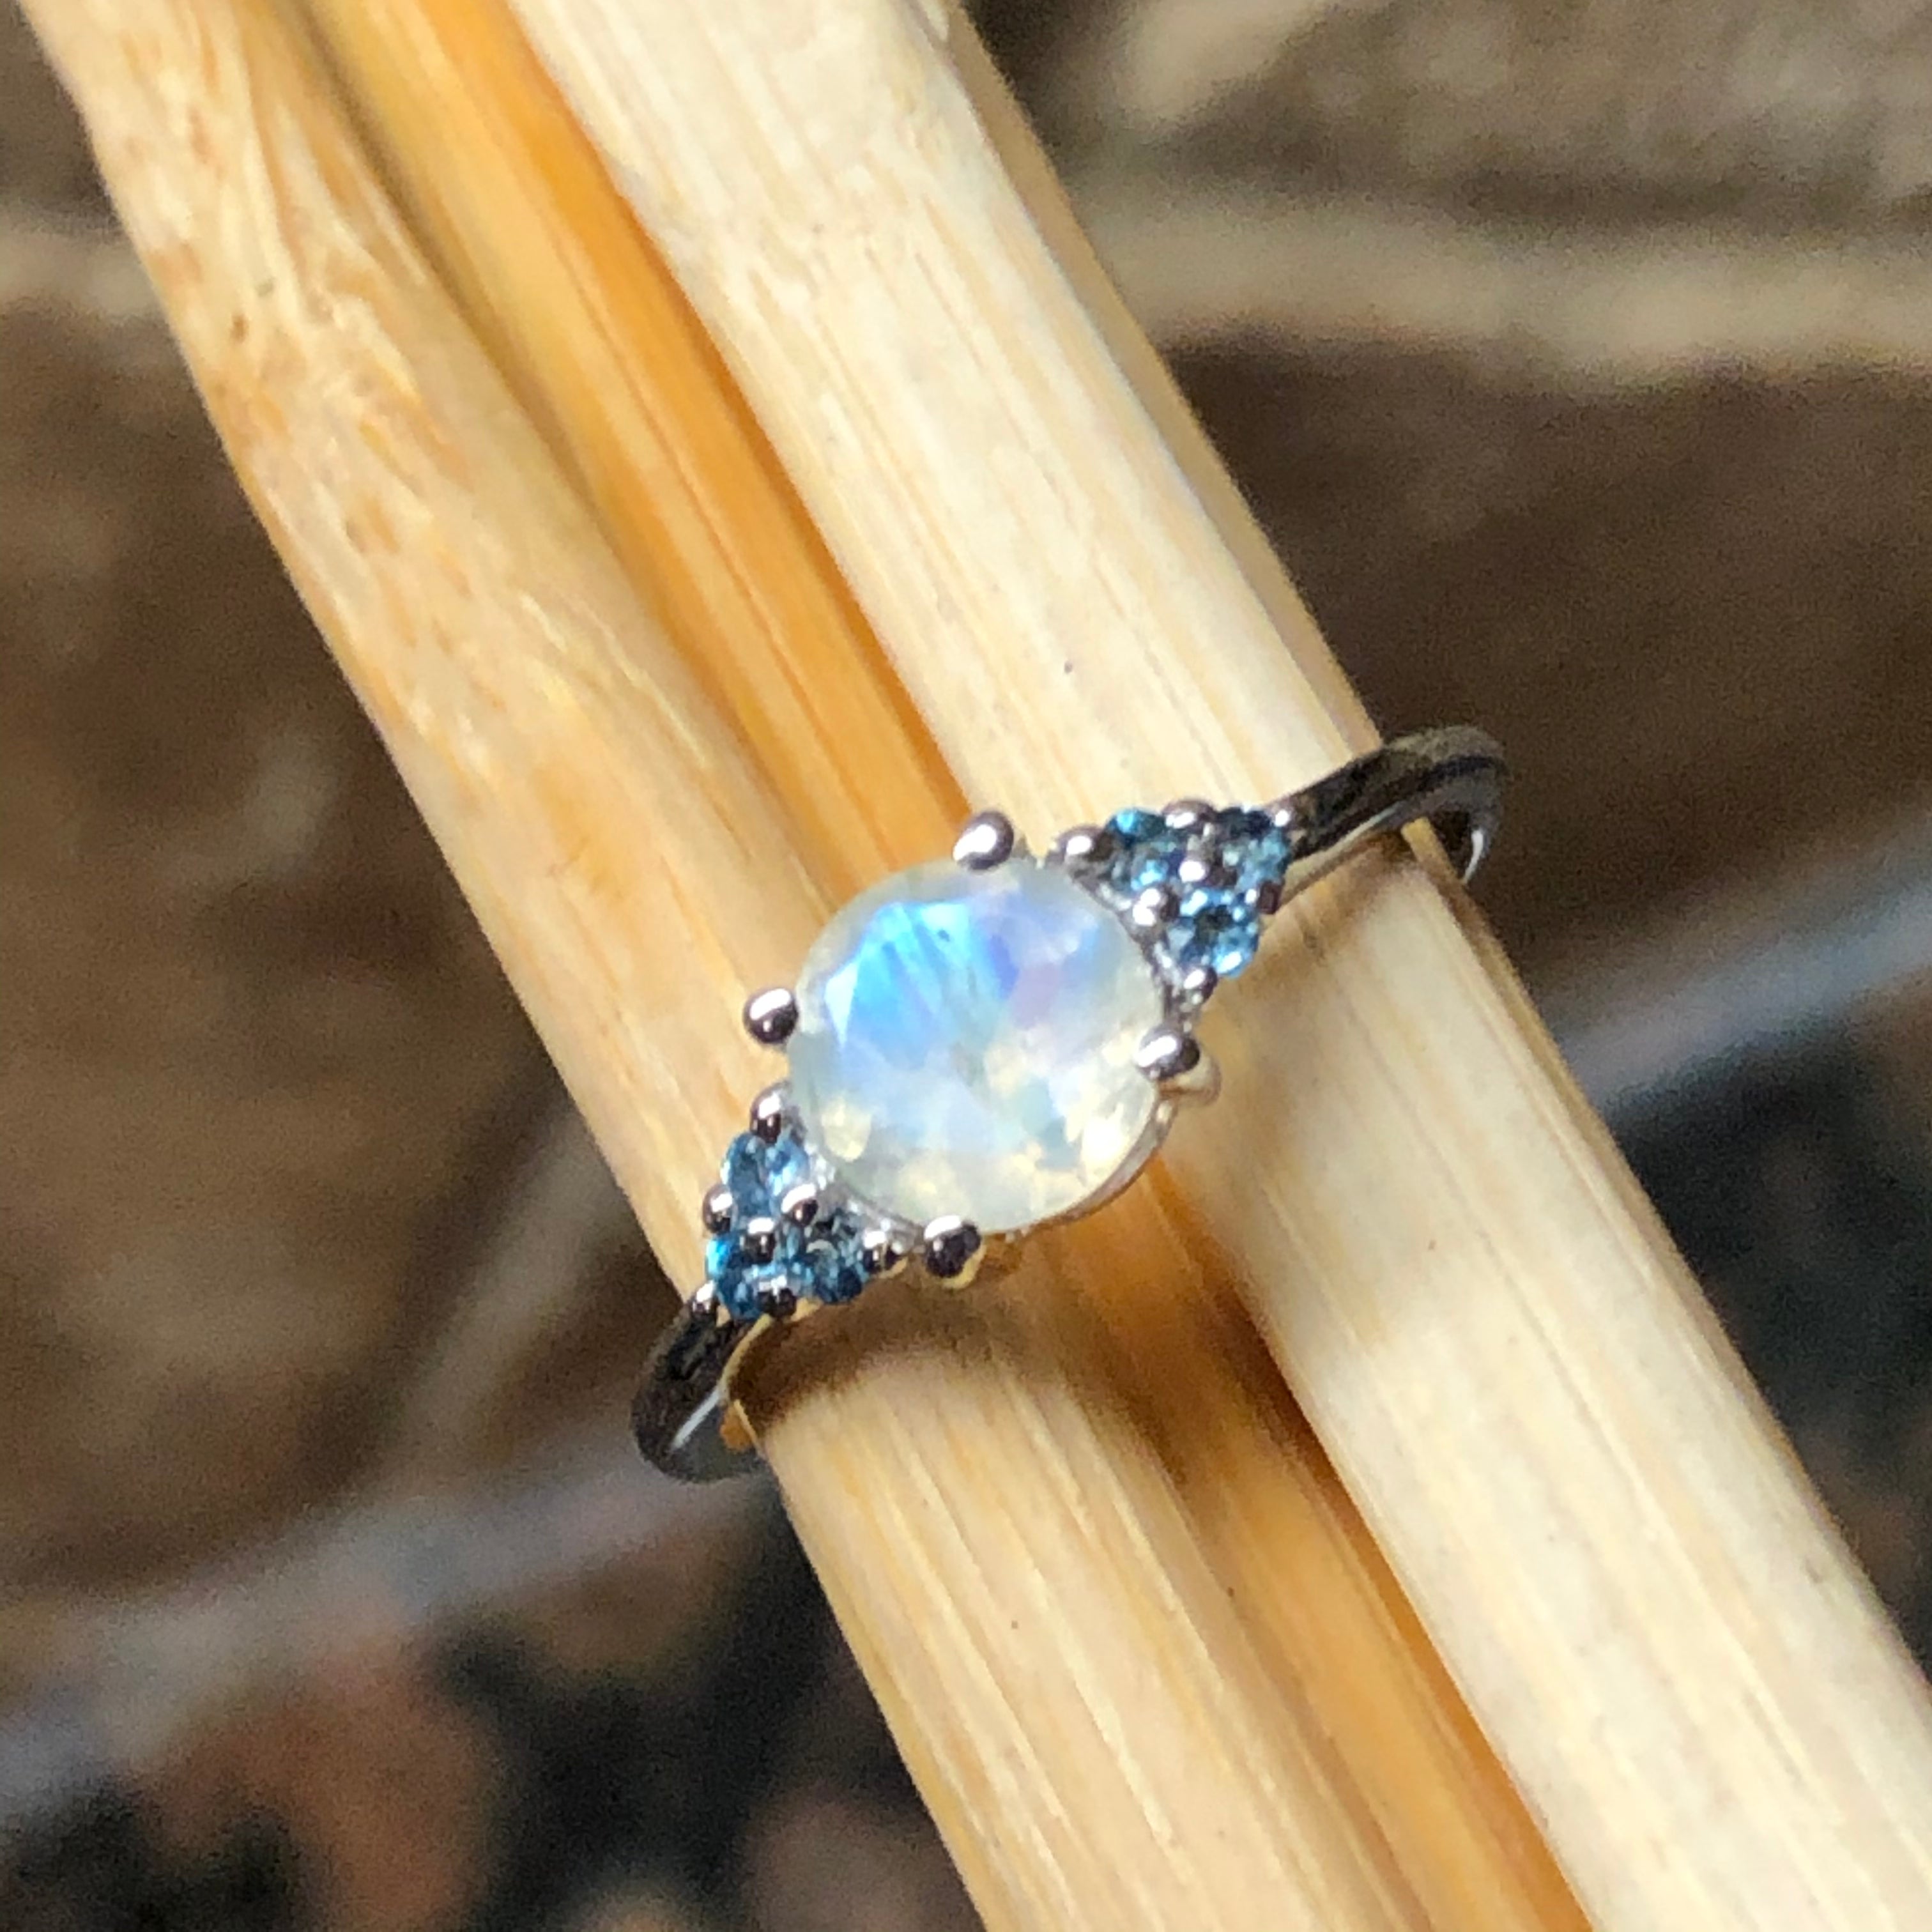 Genuine Rainbow Moonstone, London Blue Topaz 925 Solid Sterling Silver Engagement Ring Size 5, 6, 7, 8, 9 - Natural Rocks by Kala